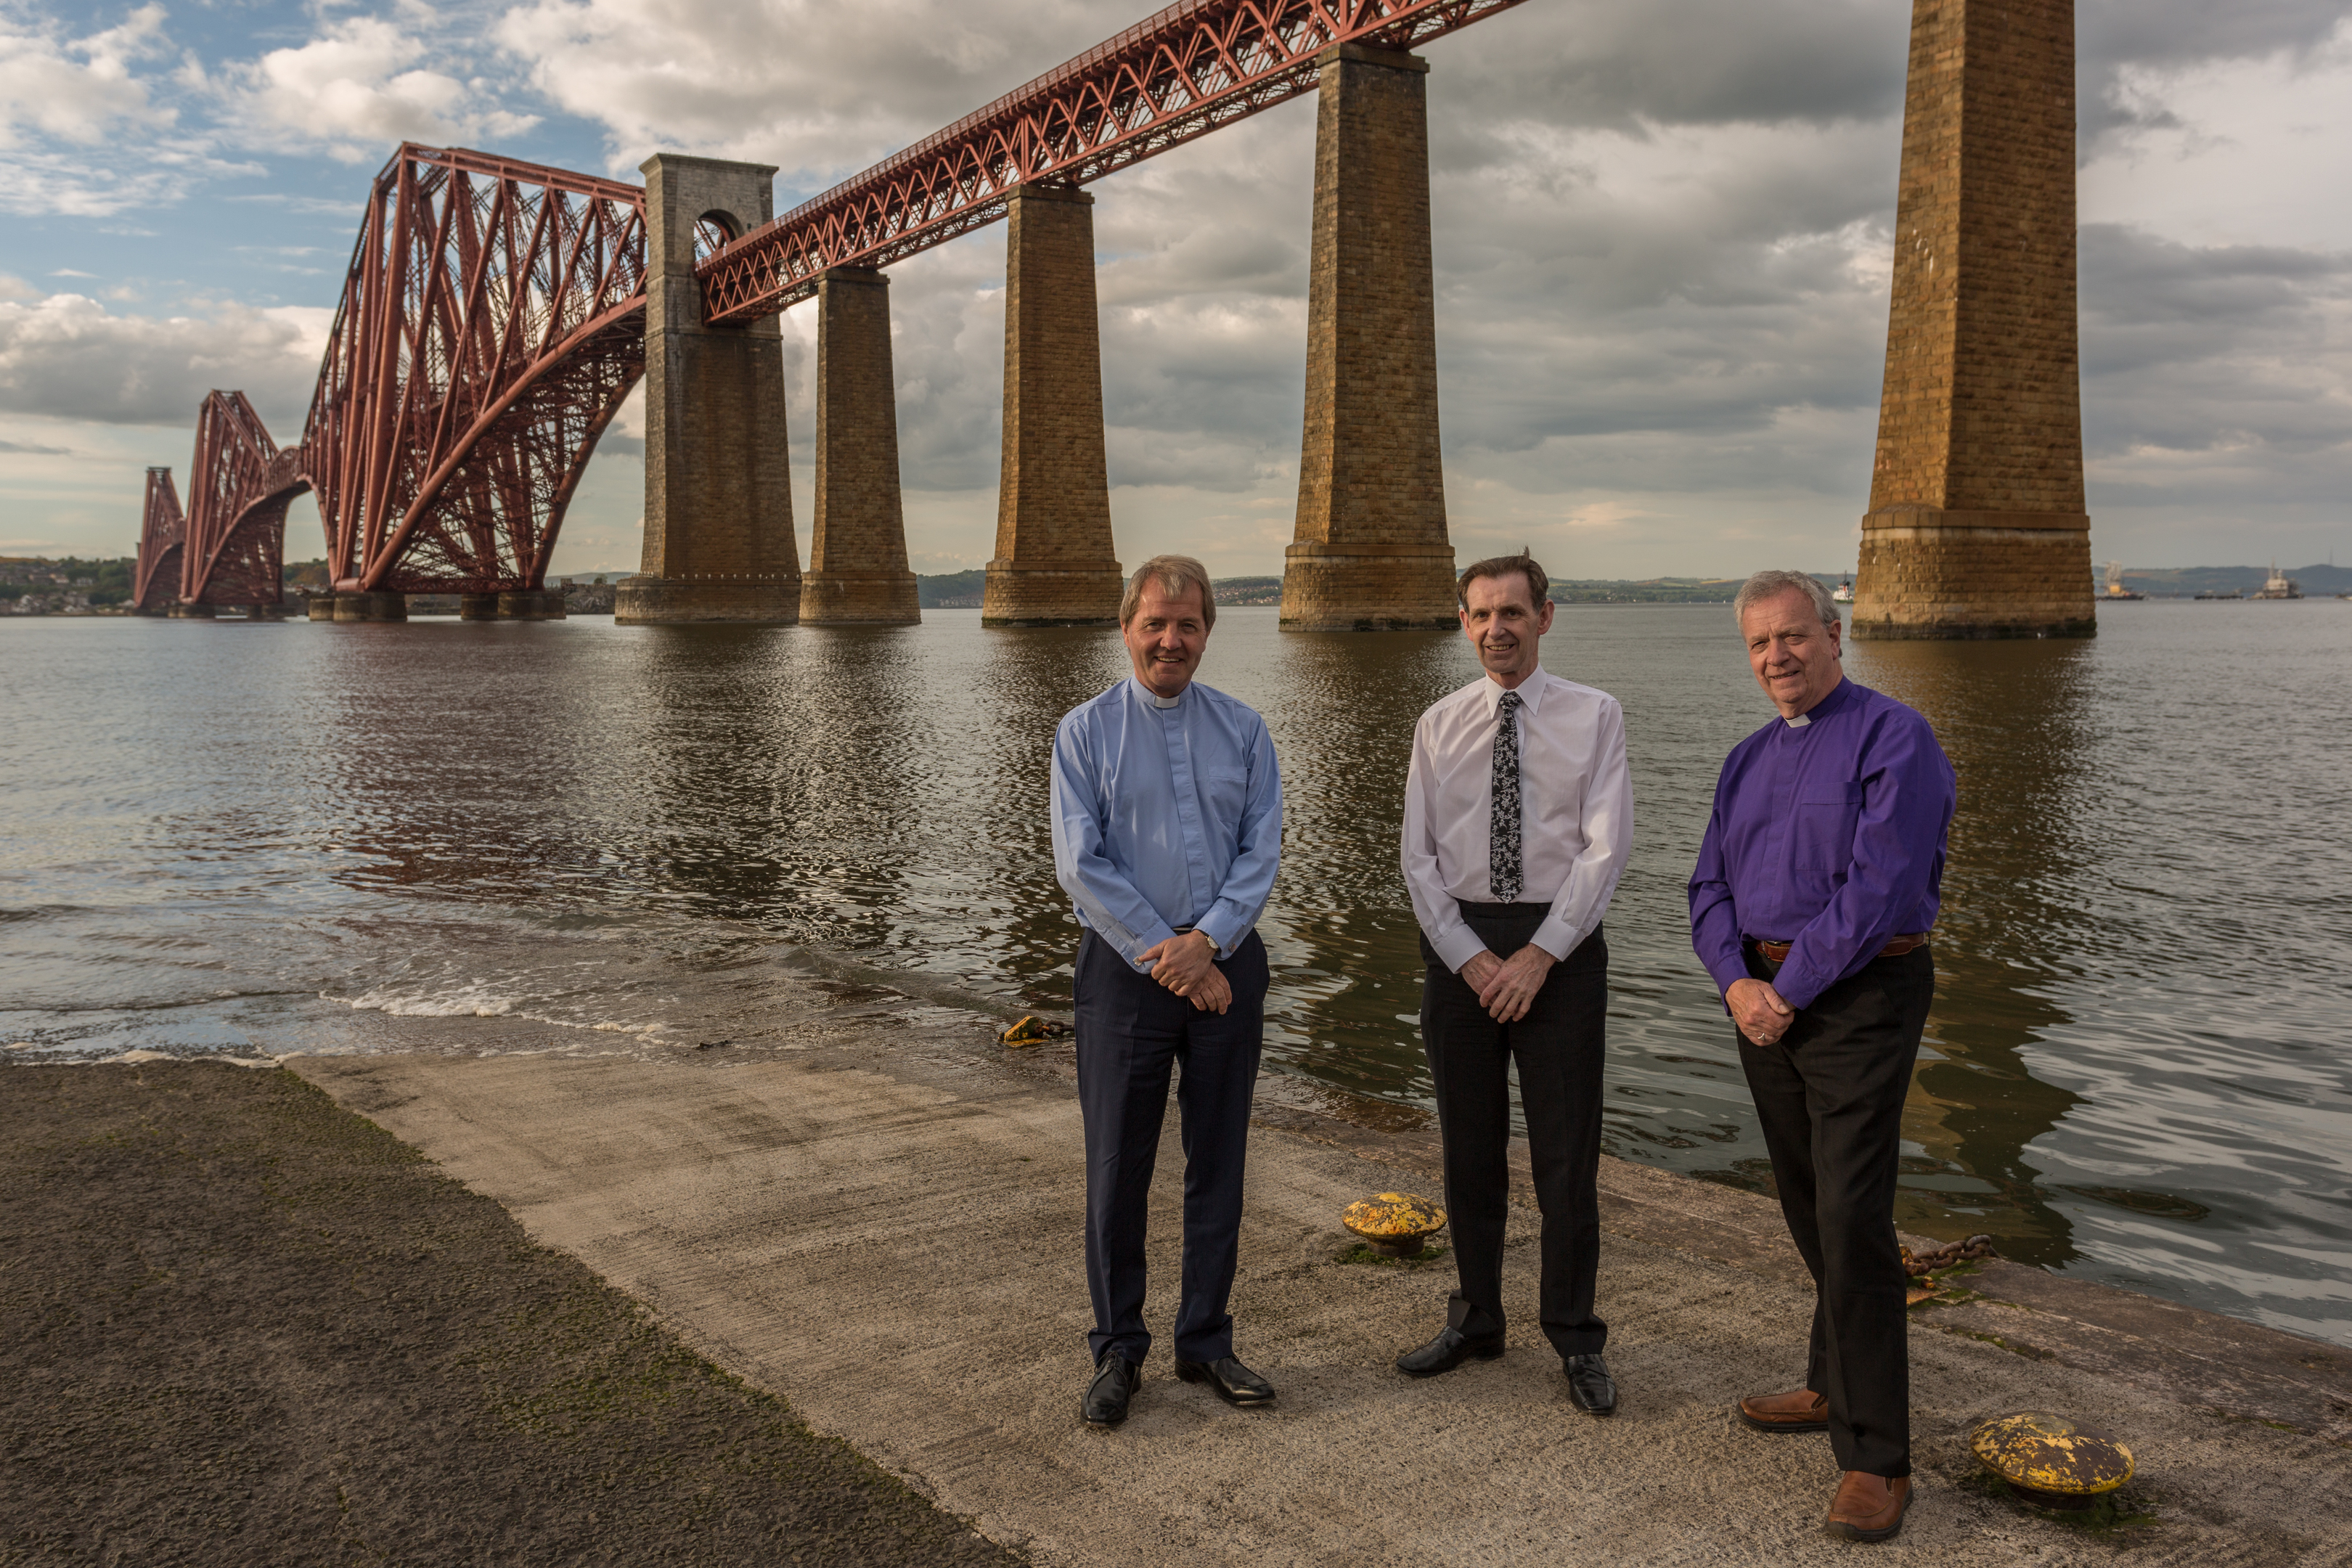 Dr Barr, Mr Bailey and Dr Chalmers will take a leap of faith as they abseil down the Forth Bridge